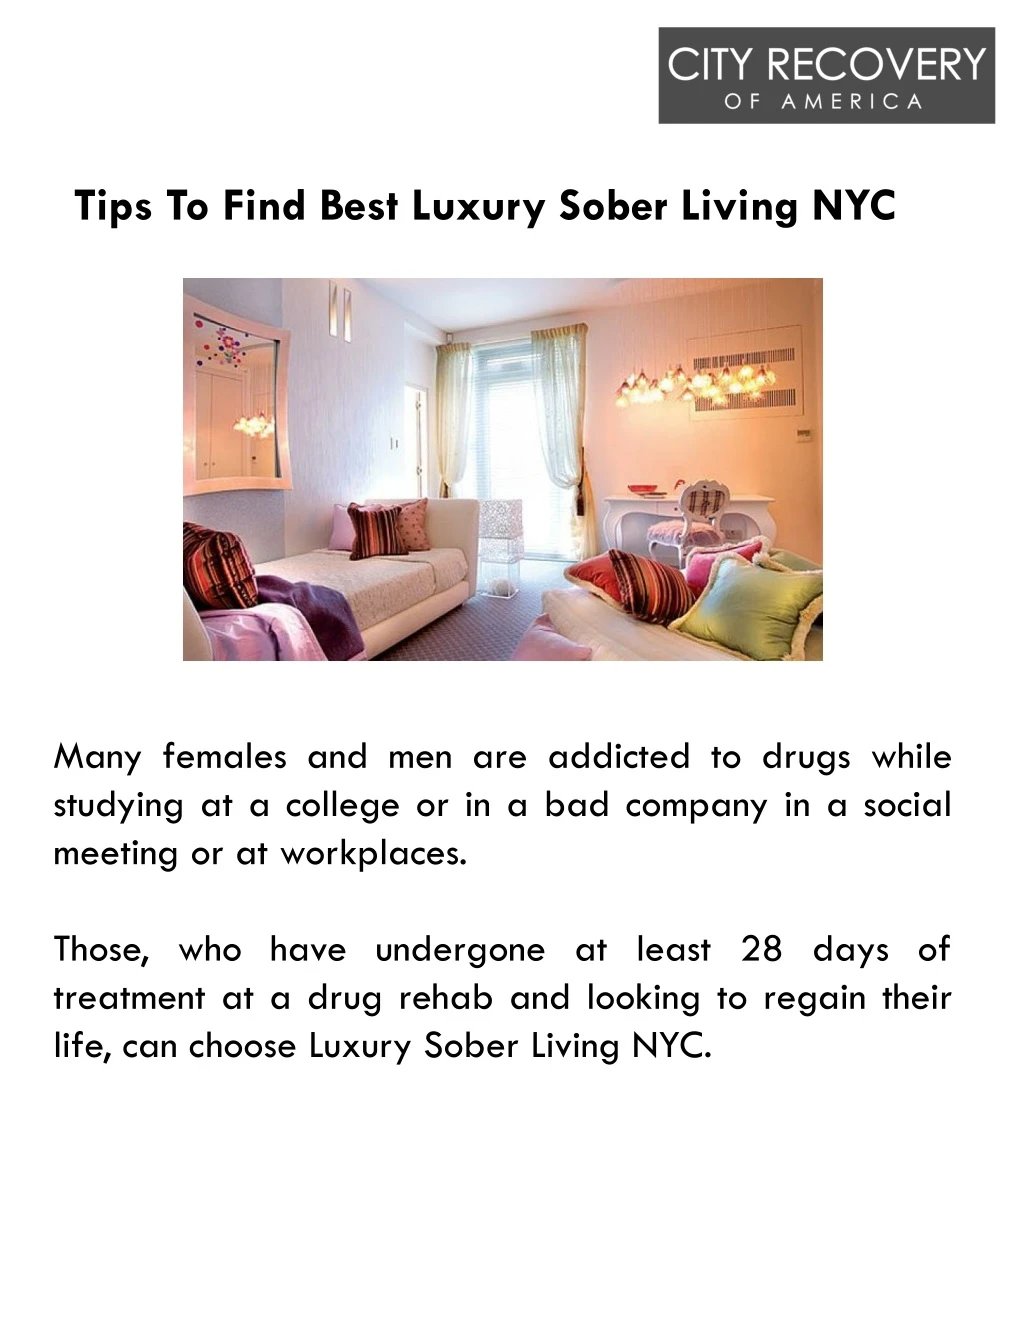 tips to find best luxury sober living nyc